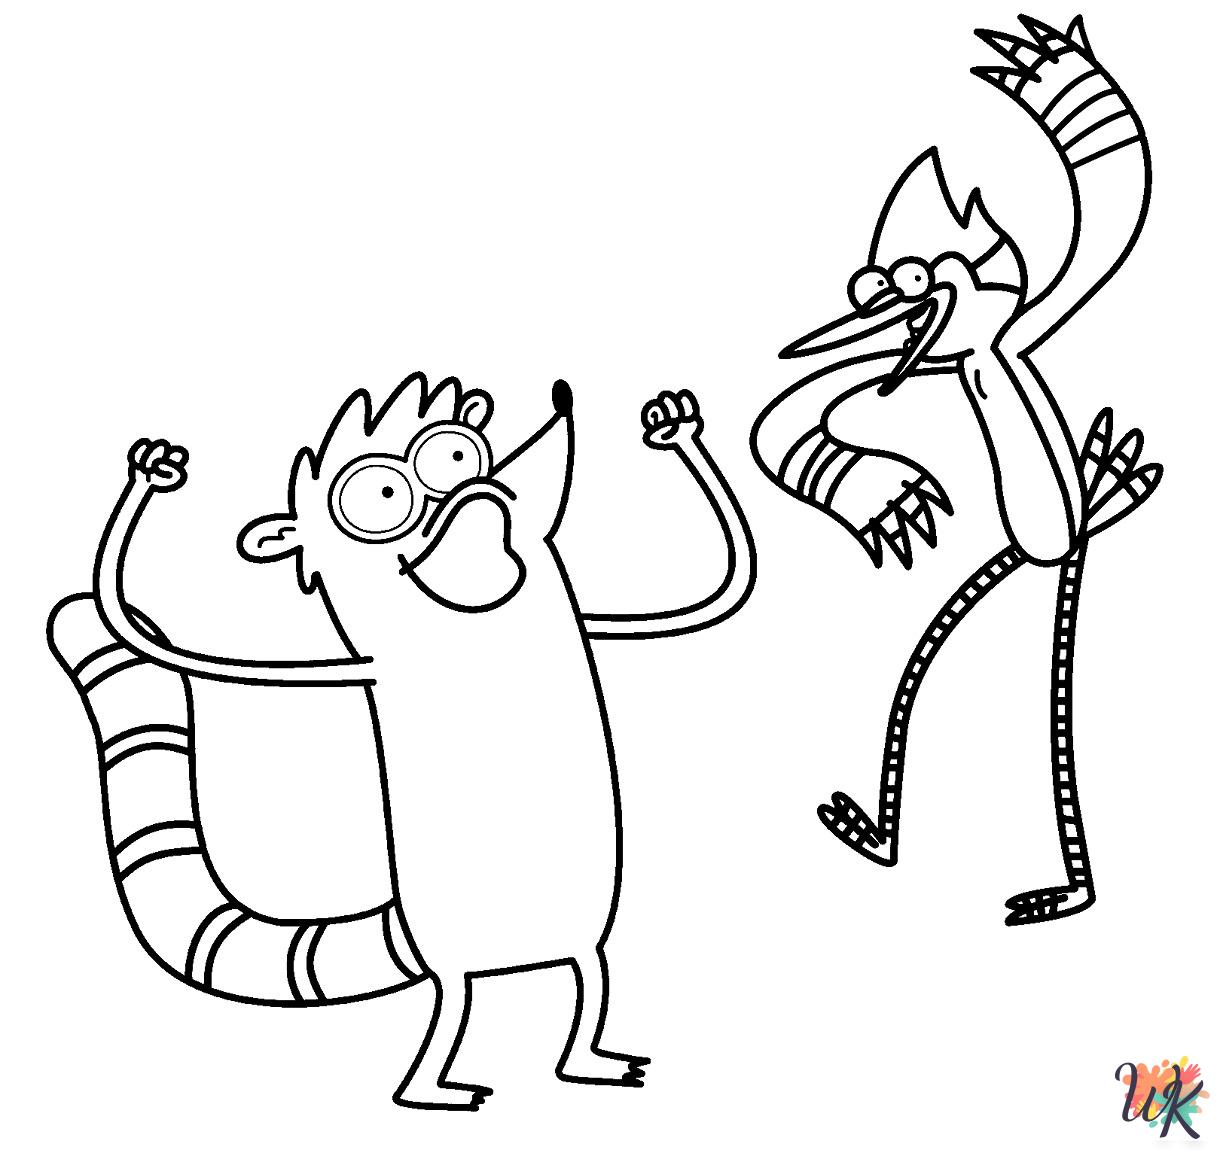 printable Regular Show coloring pages for adults